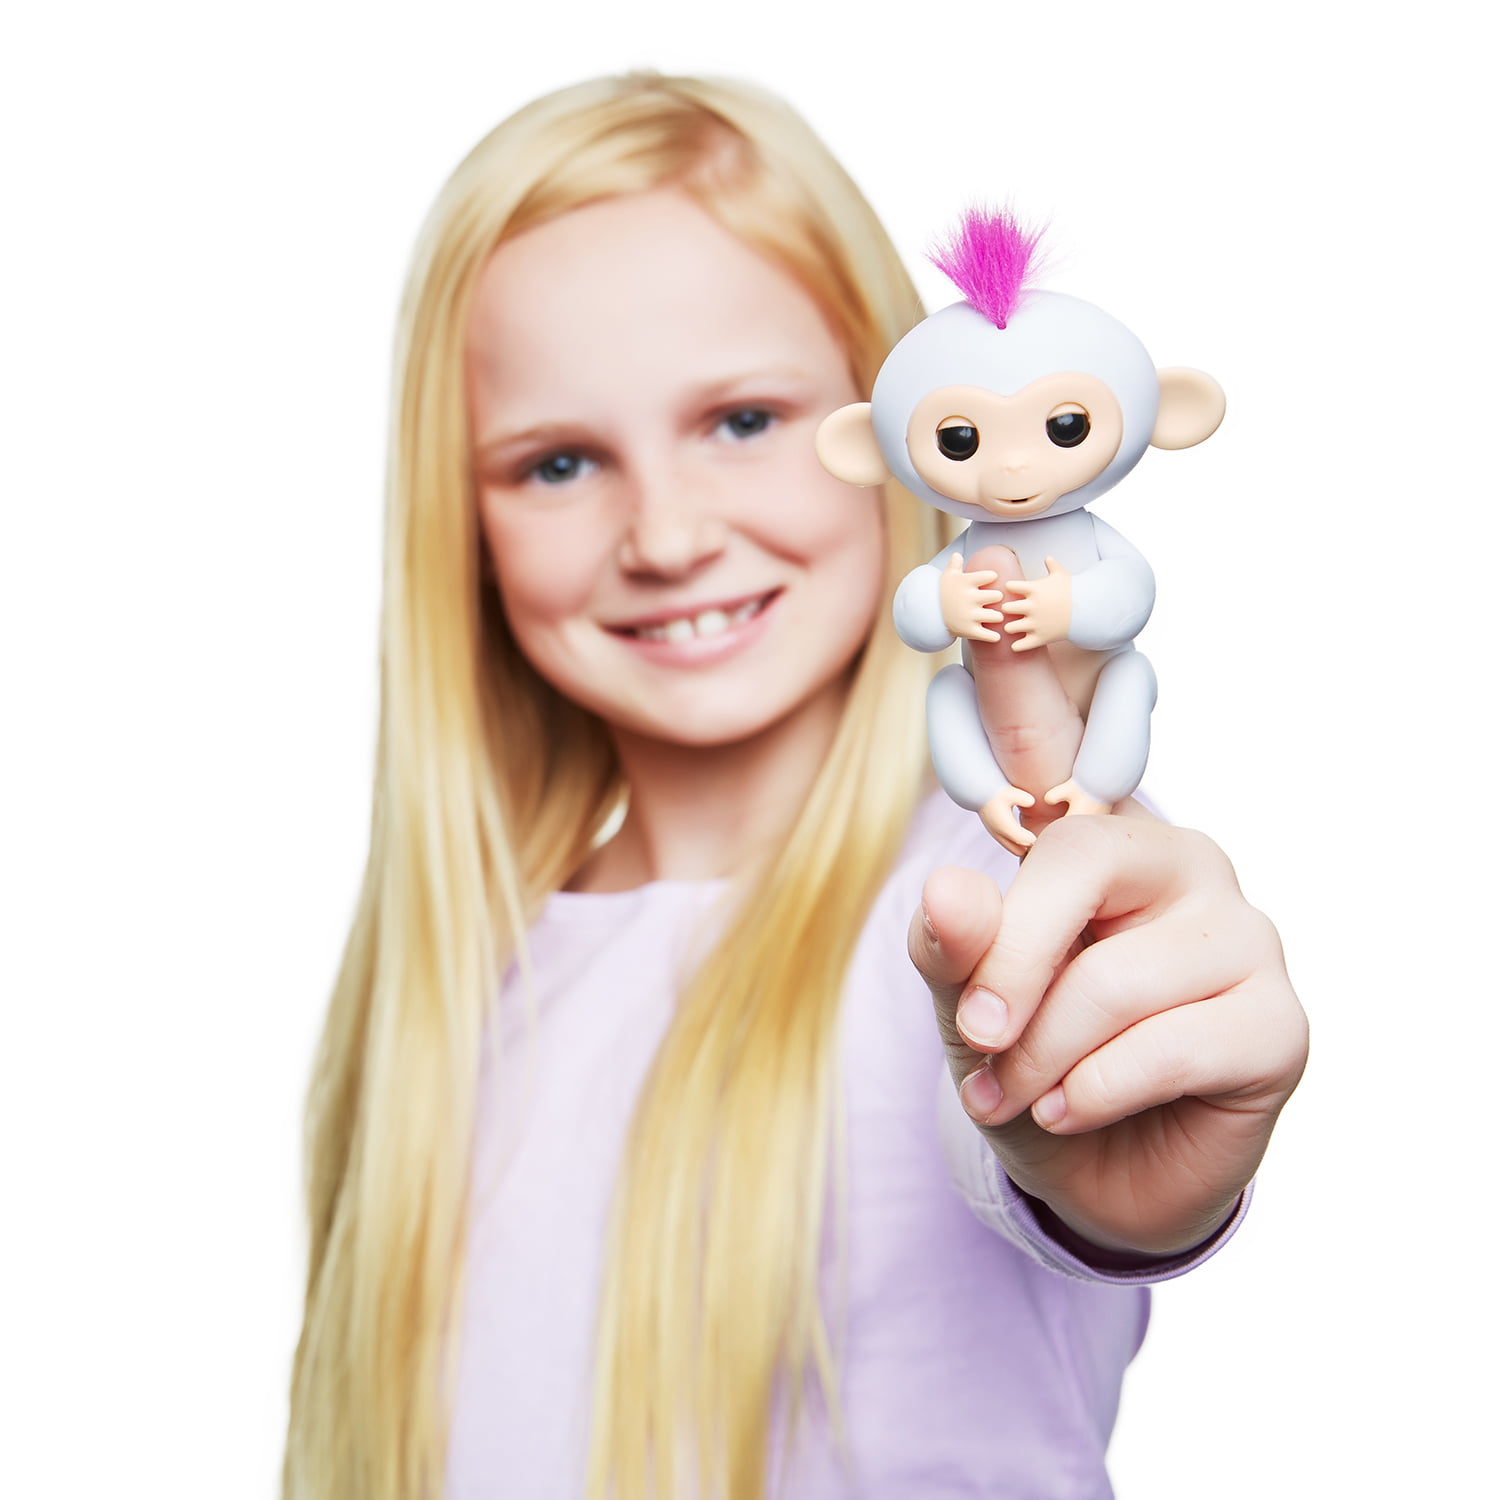 100 Authentic WowWee Fingerlings White Baby Monkey Sophie Fingerling for sale online 